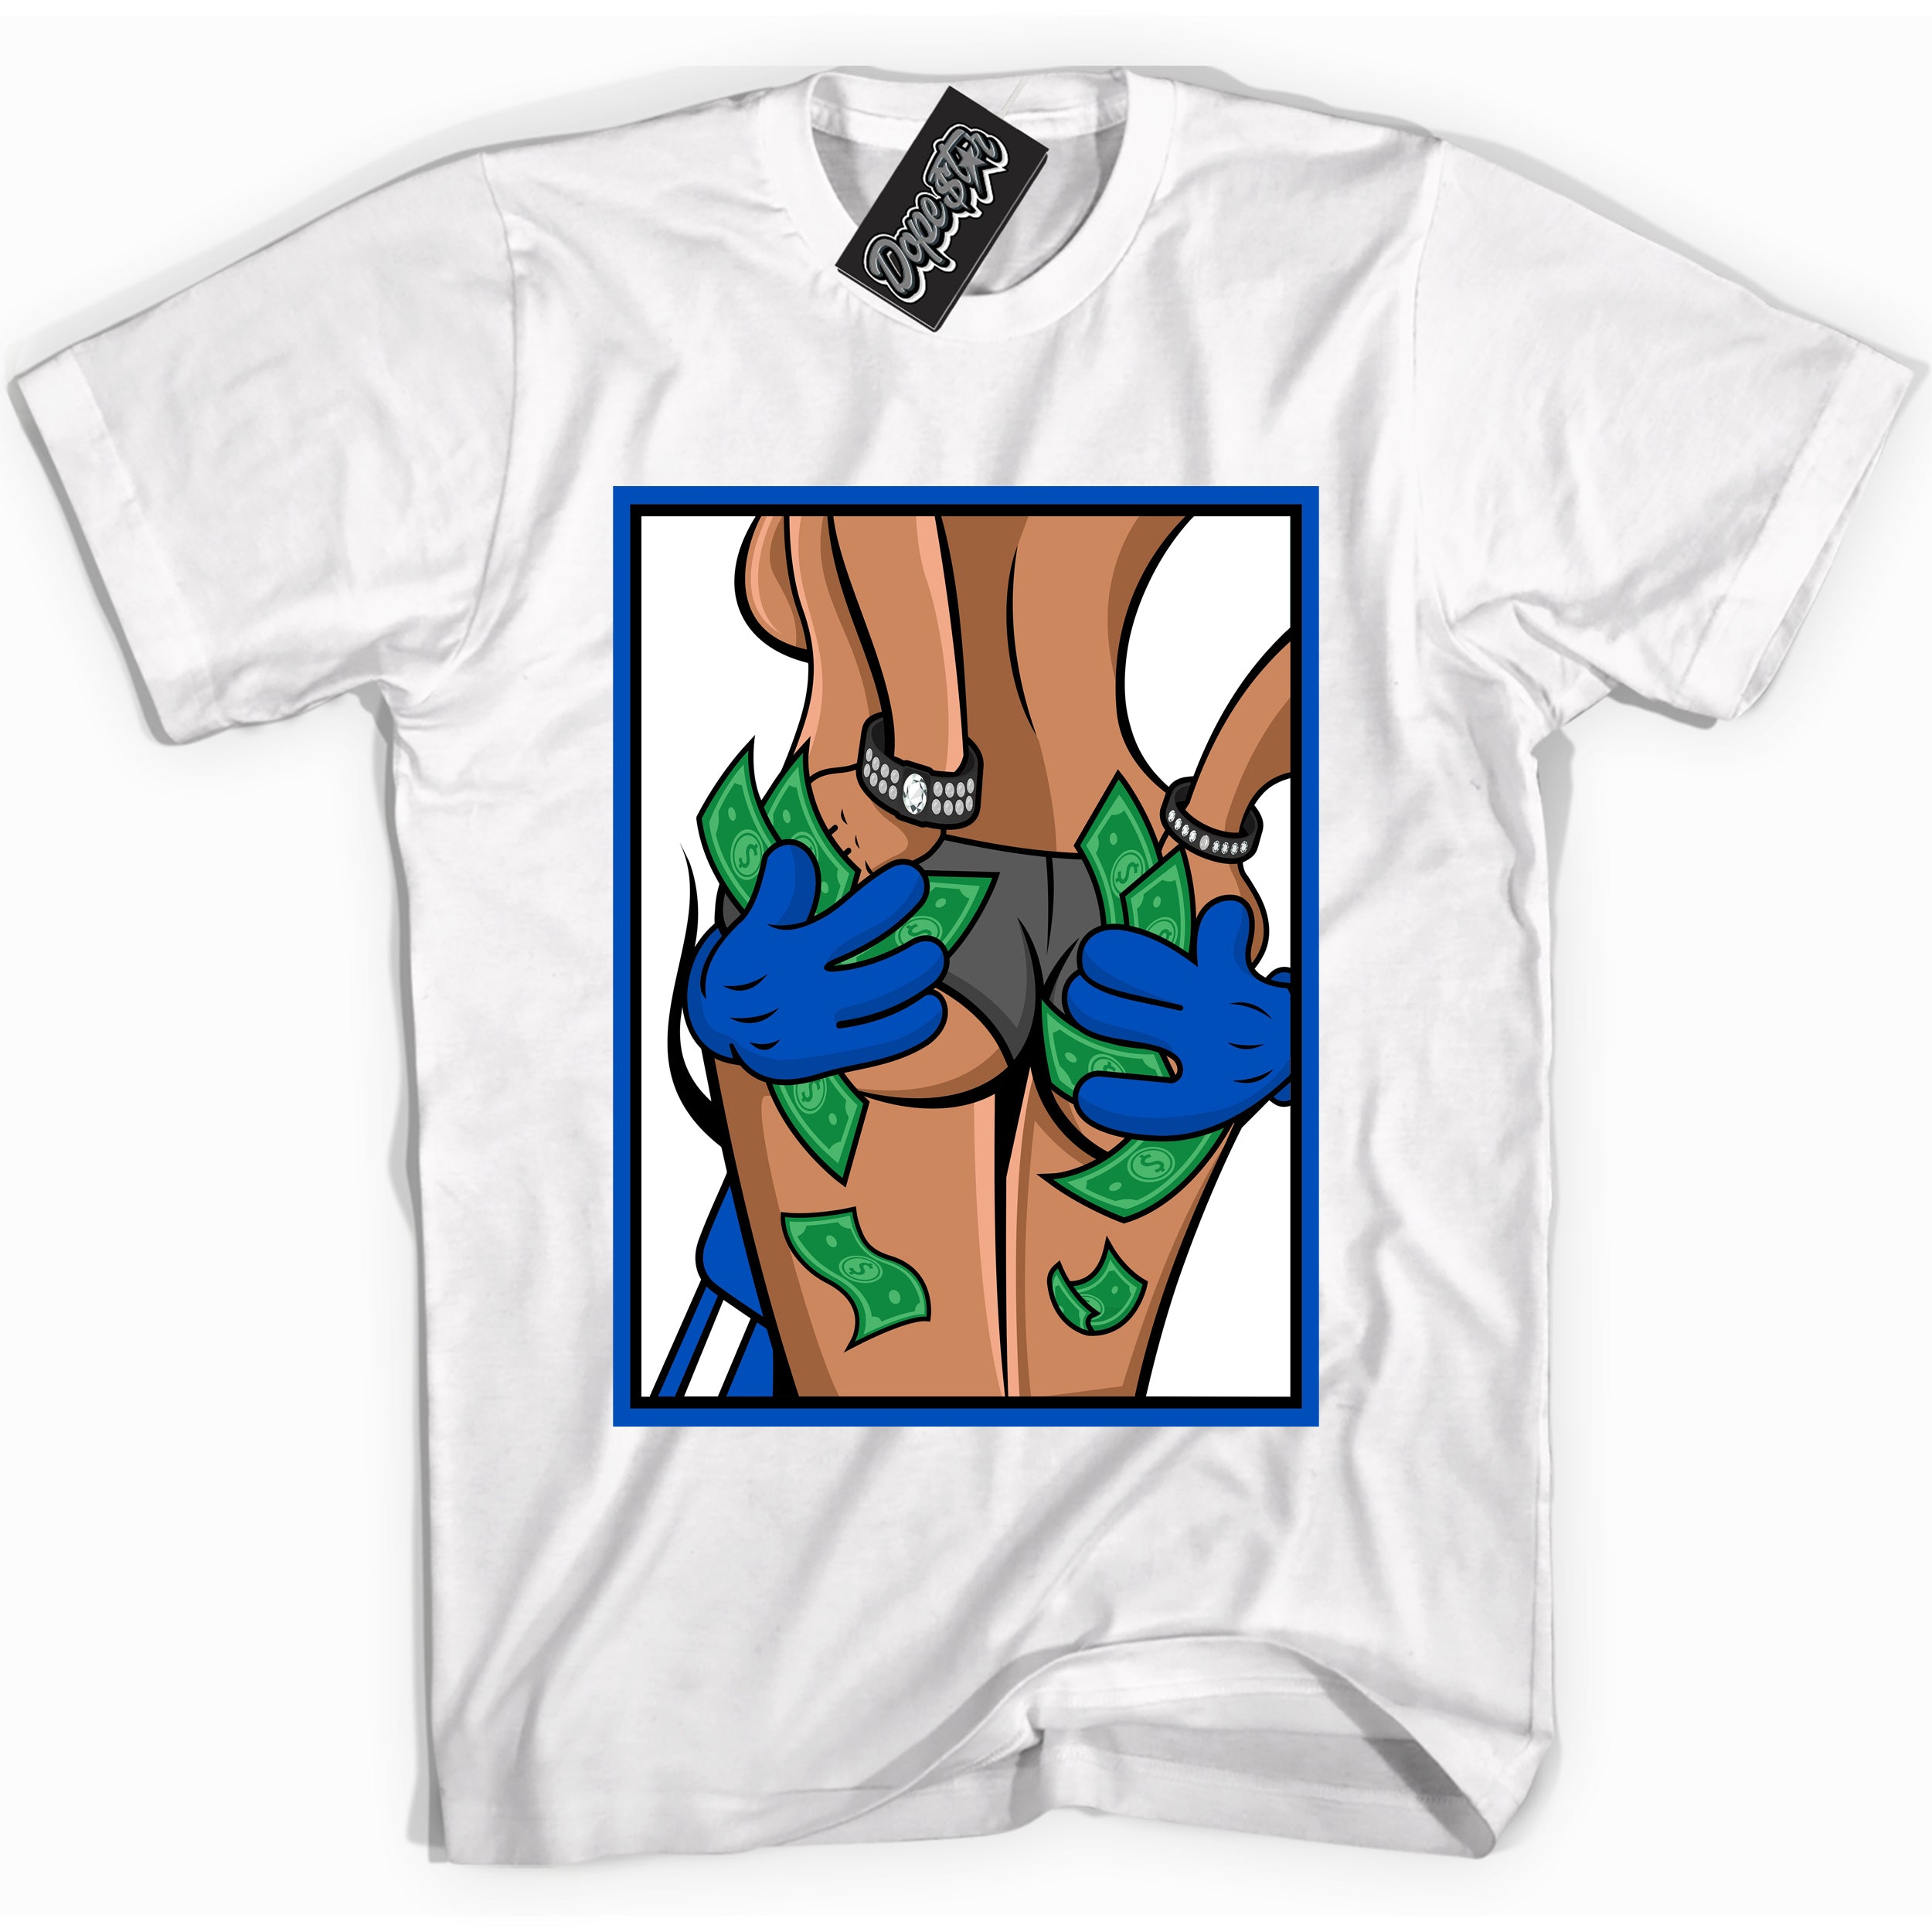 Cool White graphic tee with Money Hands print, that perfectly matches OG Royal Reimagined 1s sneakers 